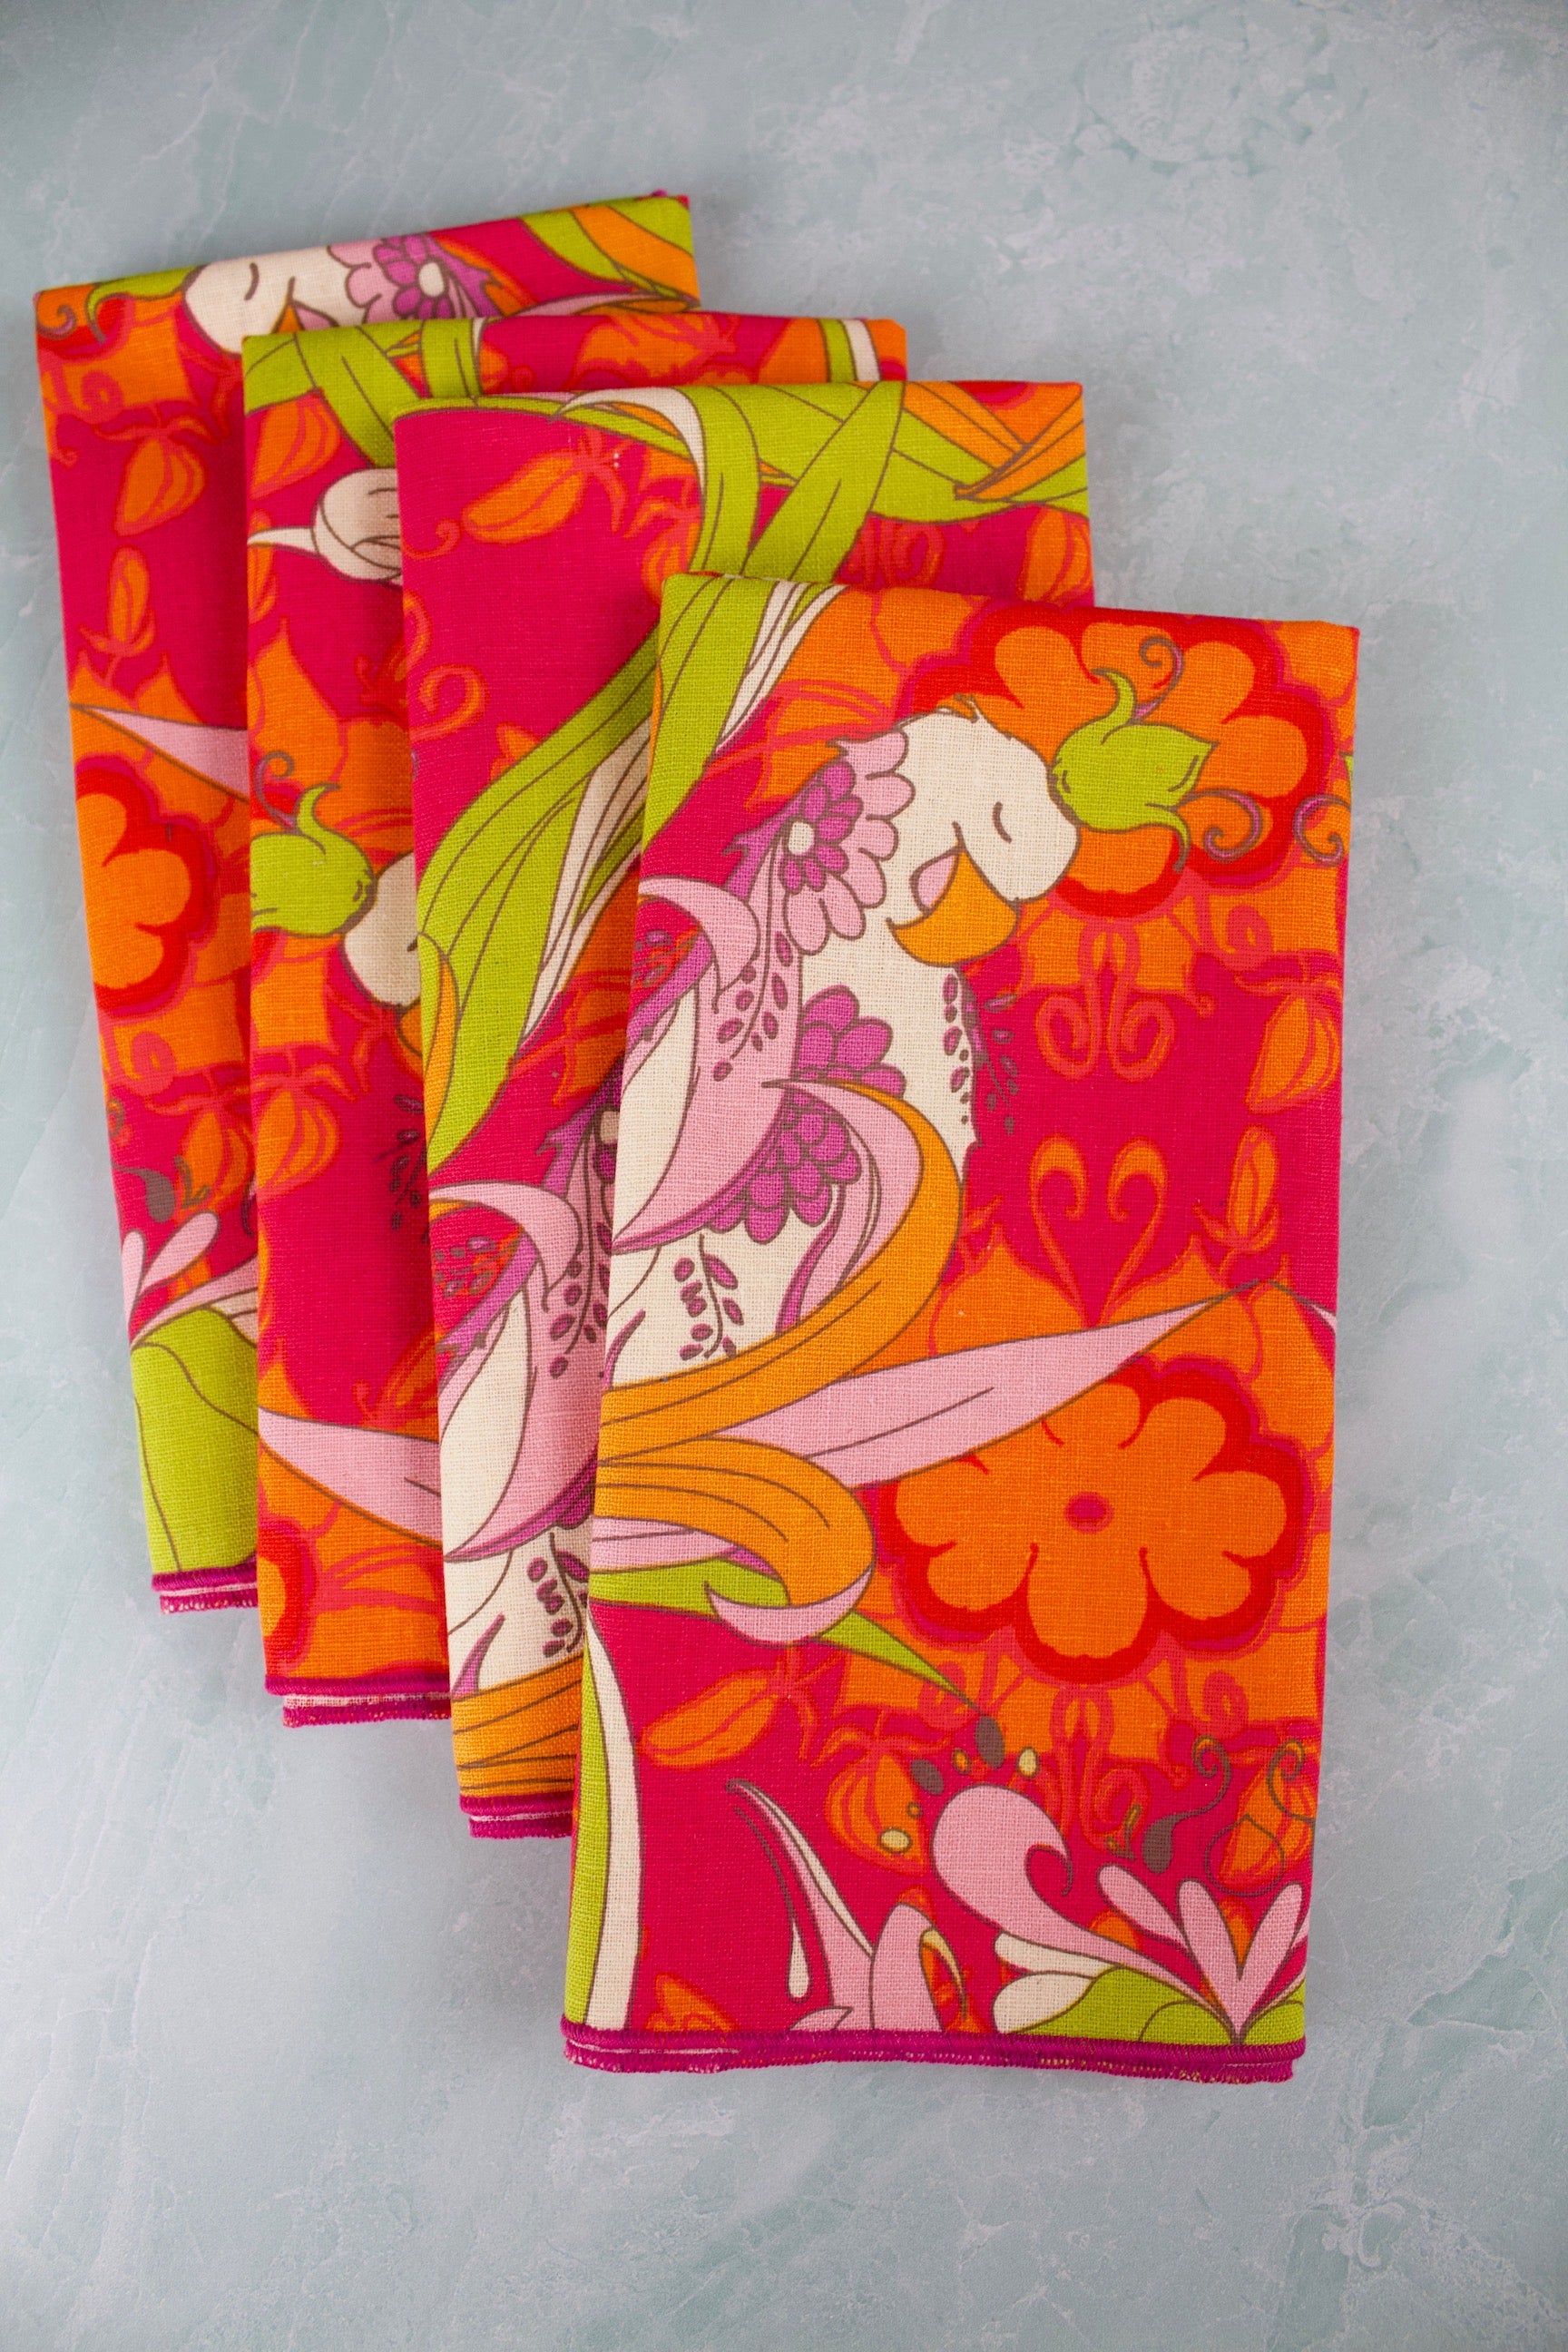 Bird of Paradise Linen Napkins - (Set of 4)-The Blue Peony-Animal_Bird,Category_Napkins,Category_Table Linens,Color_Orange,Color_Pink,Department_Kitchen,Material_Linen,Pattern_Floral